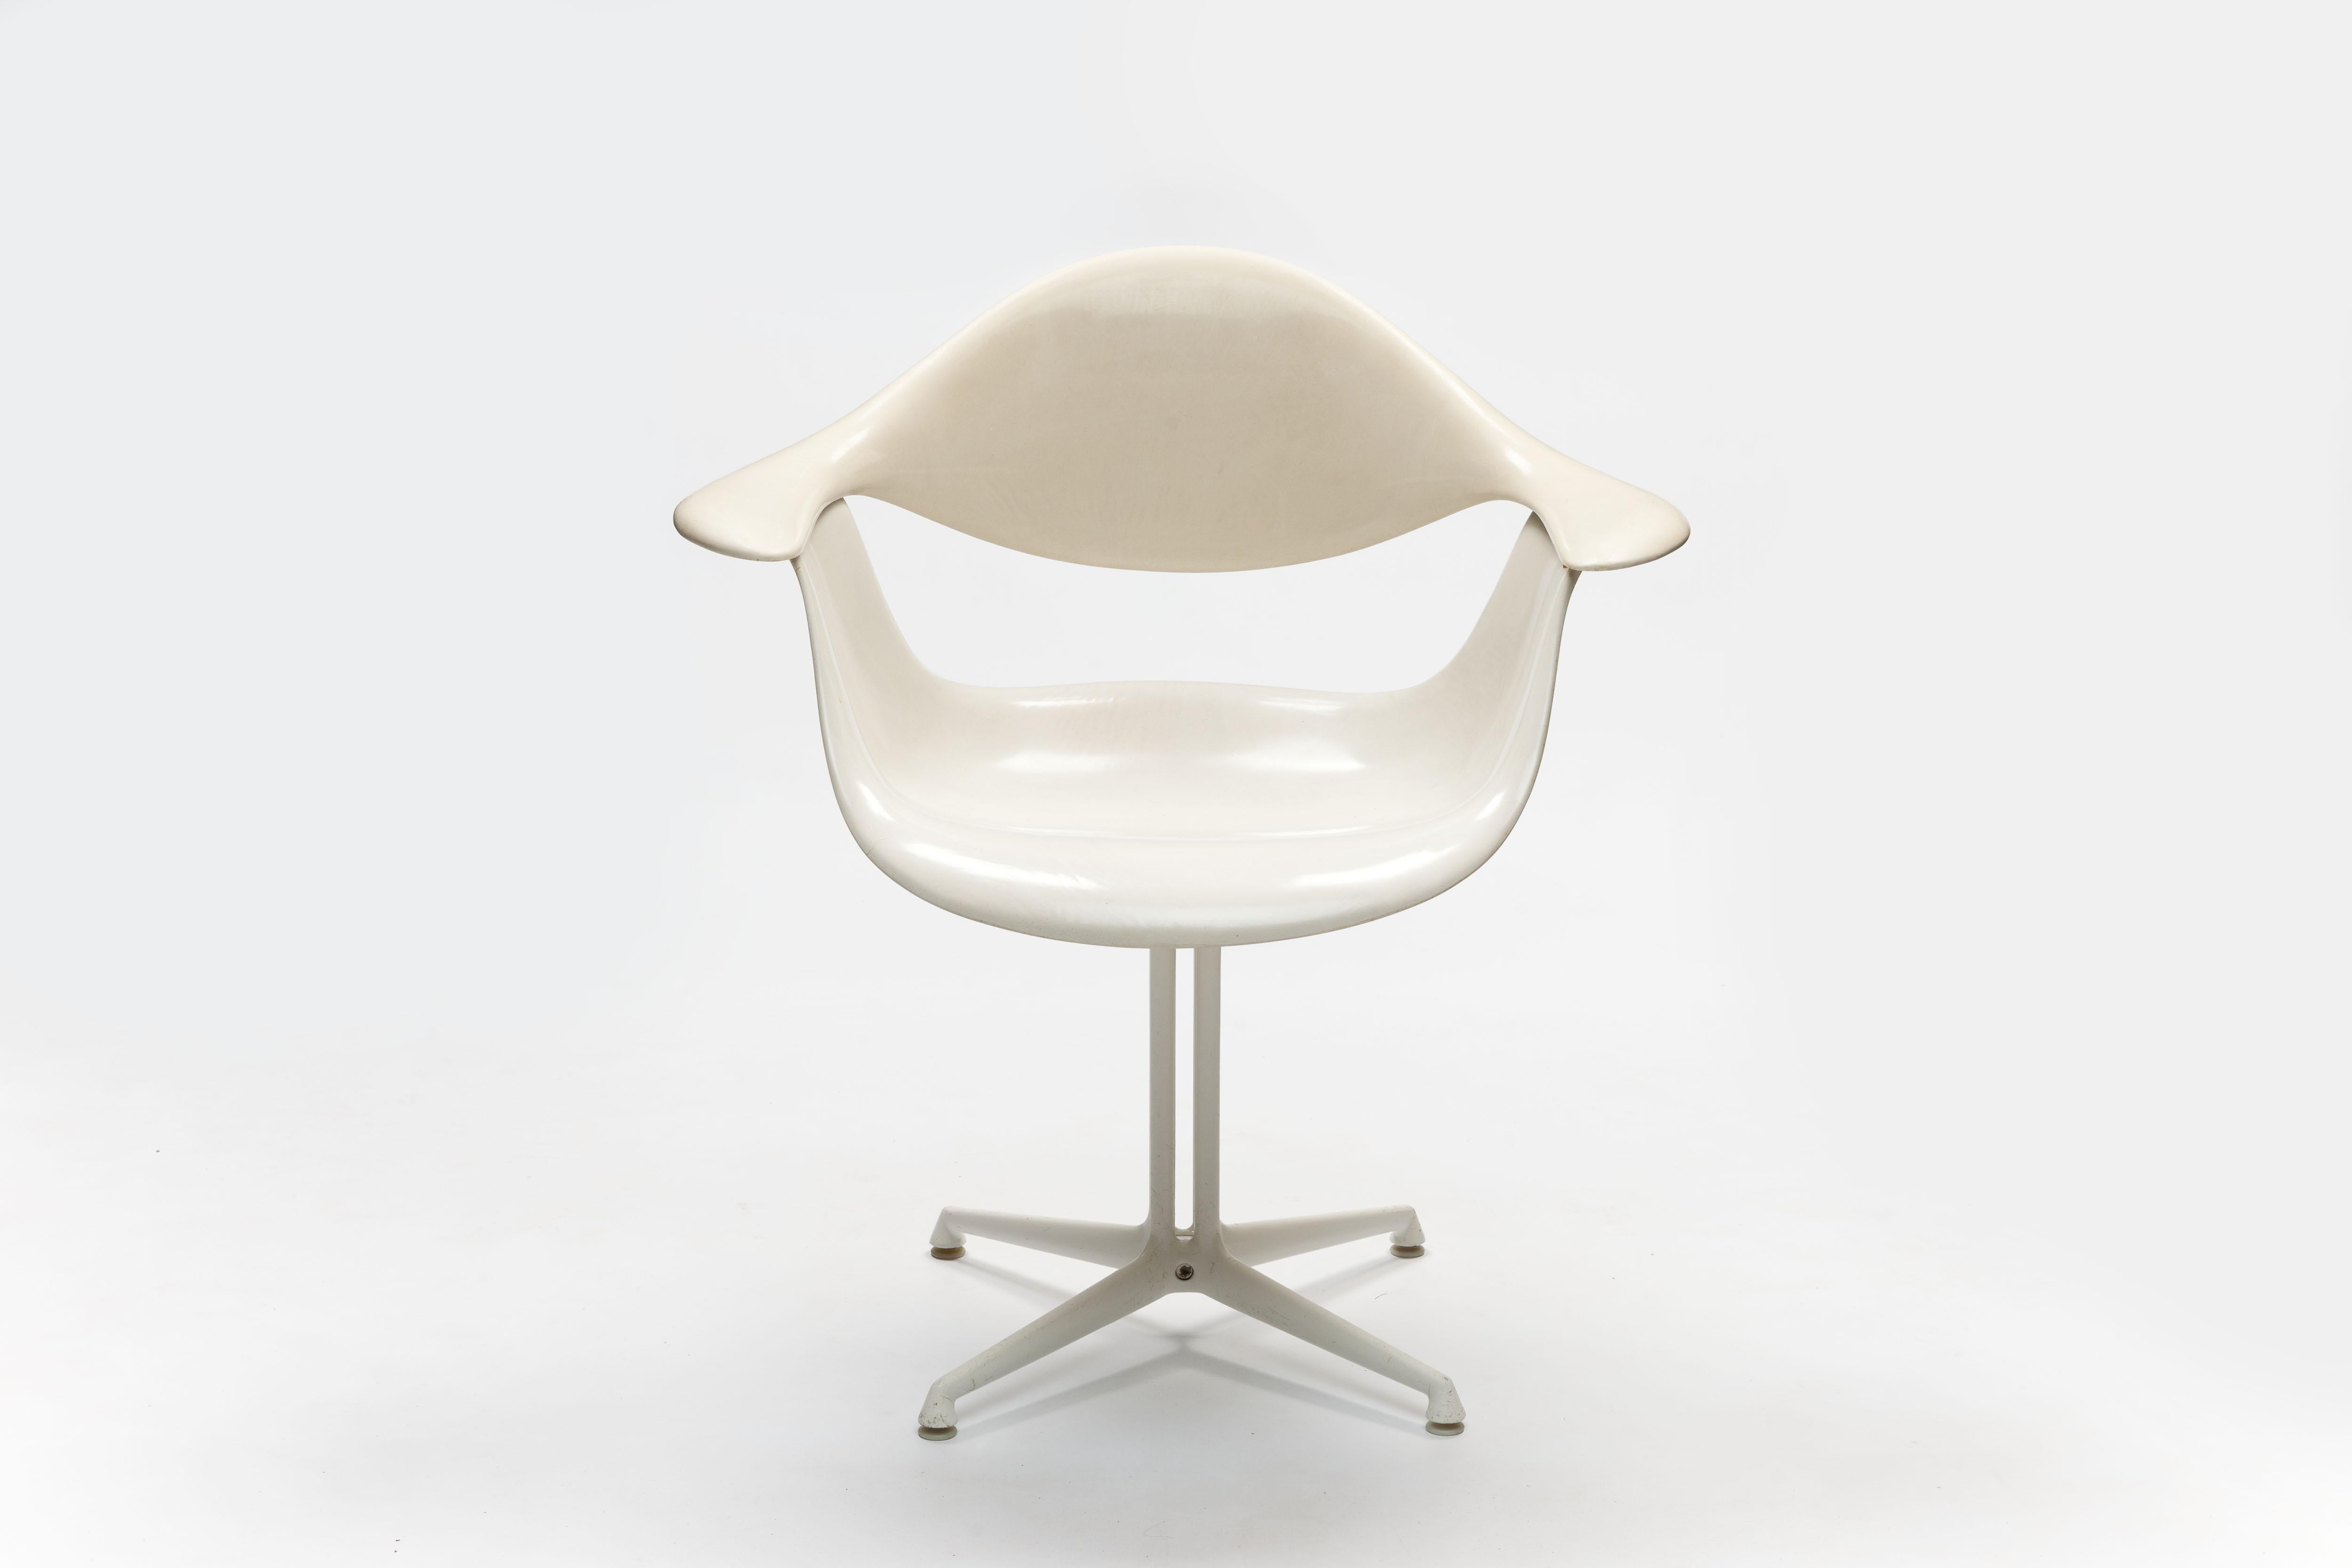 All white George Nelson 'DAF' arm chair with 'La Fonda' base by Herman Miller.
Glass fibre reinforced polyester with a white coated aluminium base, 'La Fonda' model.
Originally designed in 1956. This execution is from the mid-1960s.

Complimentary